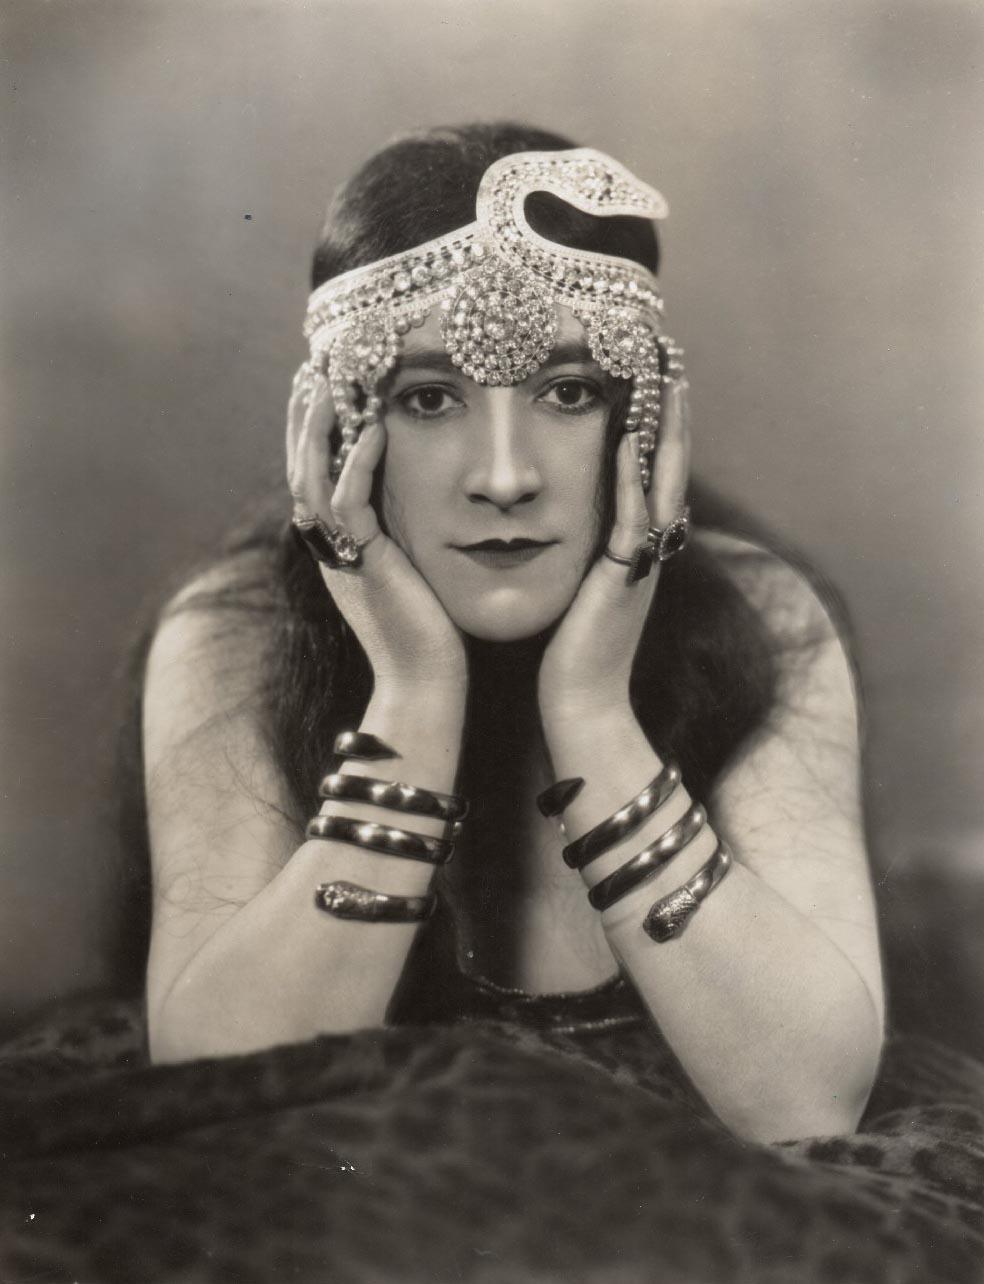 Clara Serena in character for the Opera Samson and Delilah